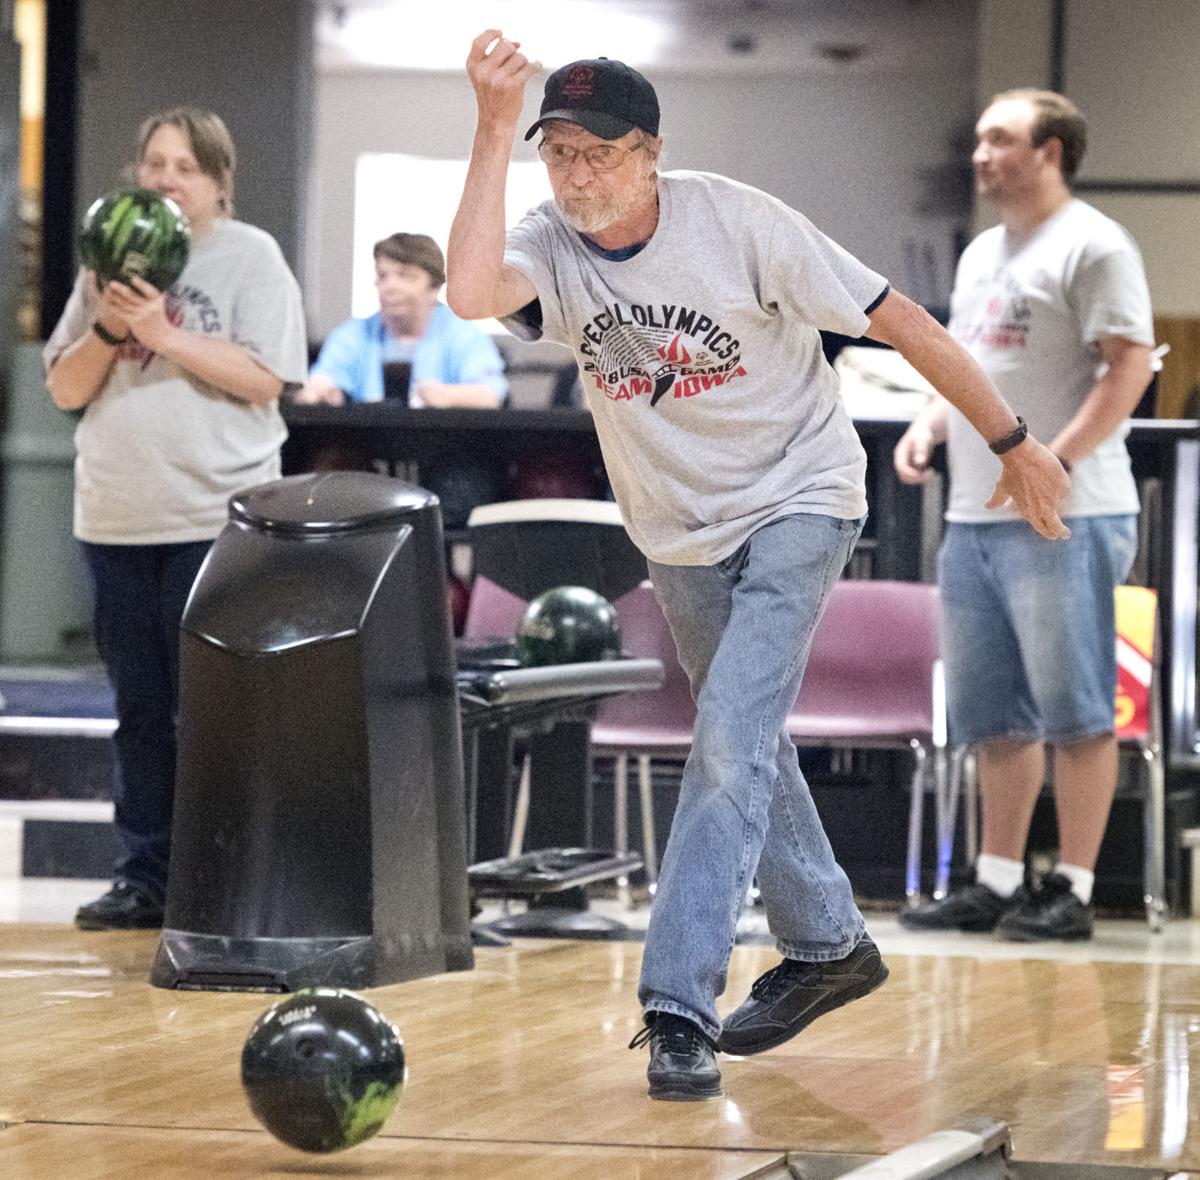 Iowa's only Special Olympics bowling team to compete in Seattle Local